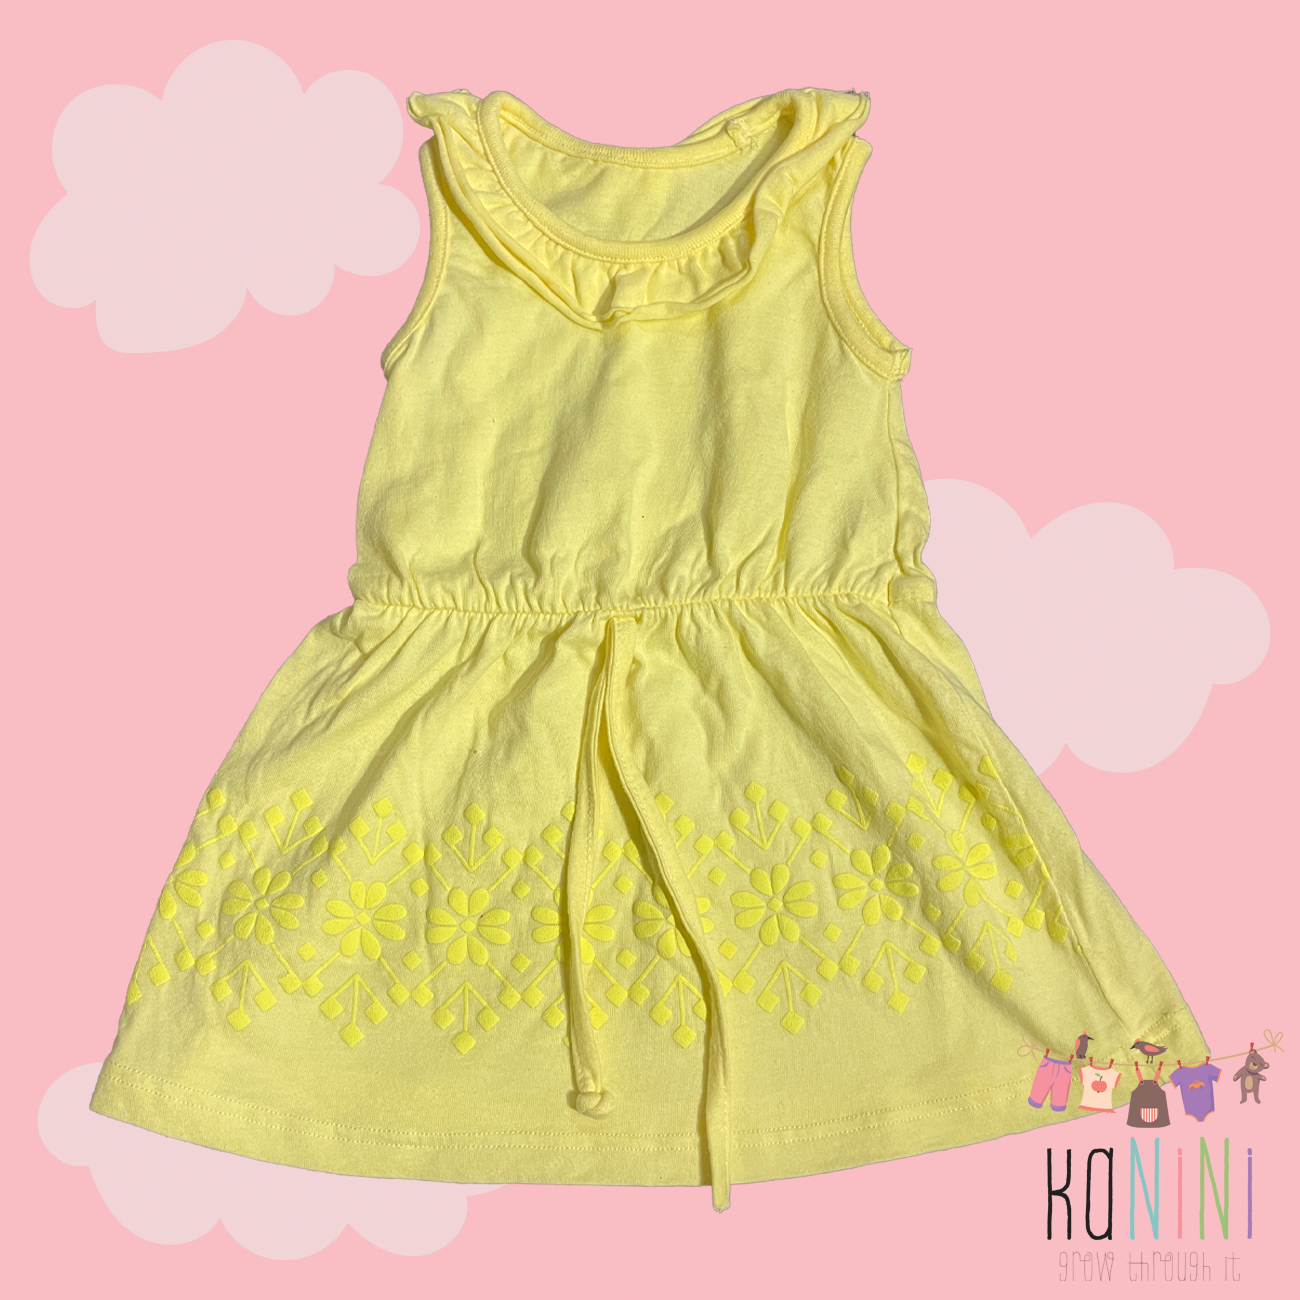 Featured image for “Woolworths 3 - 6 Months Girls Yellow Dress”